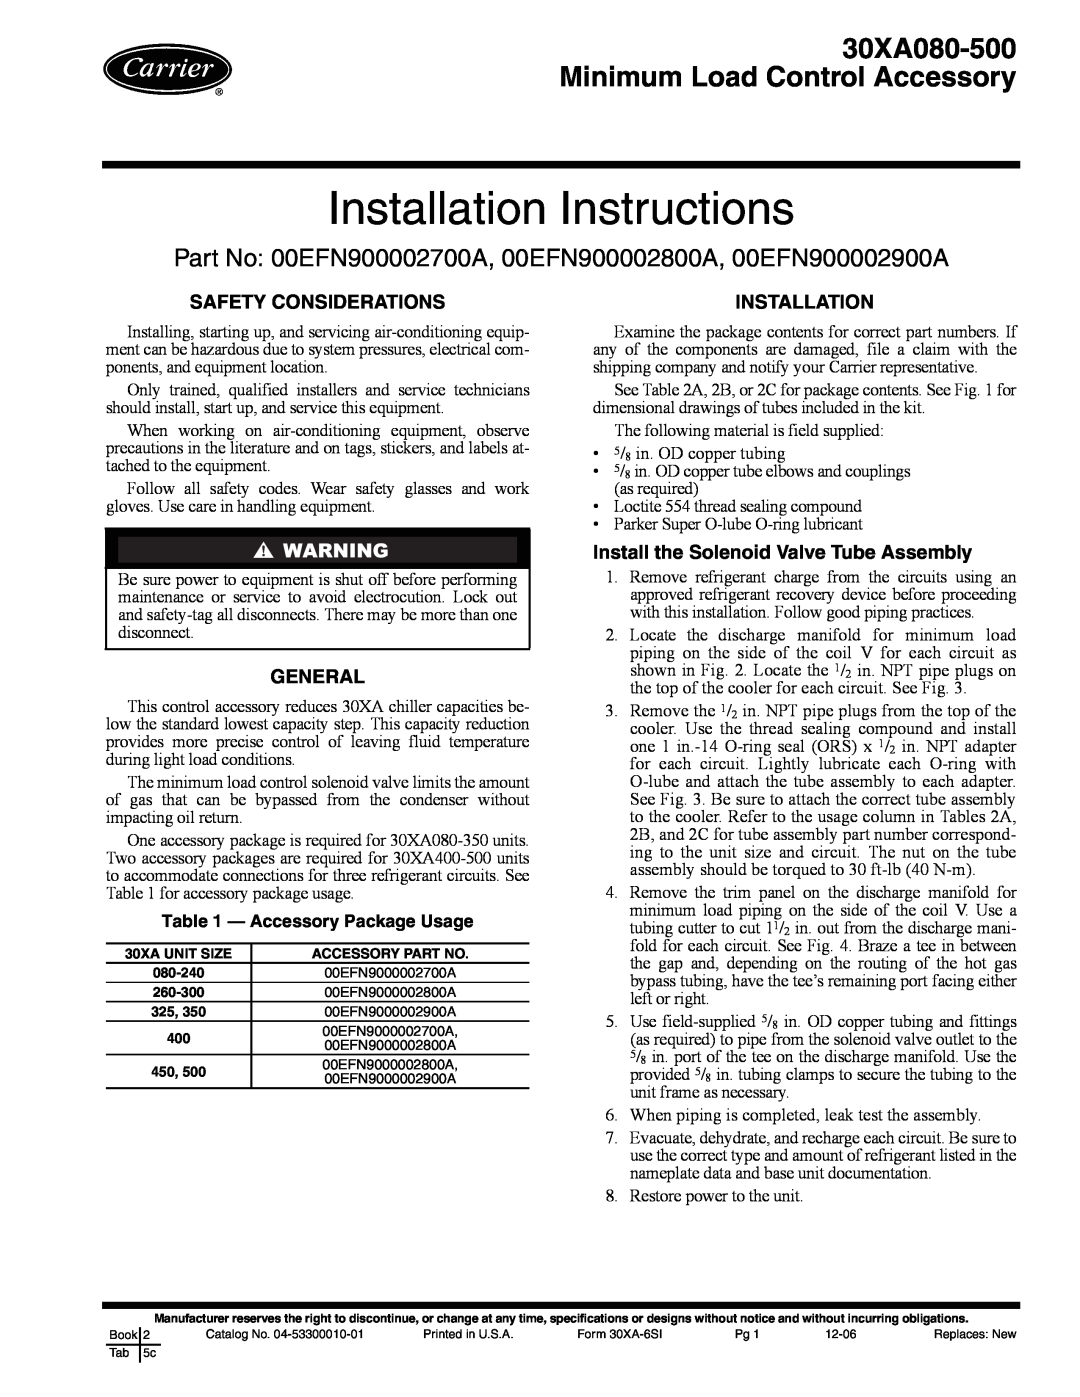 Carrier 30XA080-500 installation instructions Safety Considerations, General, Install the Solenoid Valve Tube Assembly 